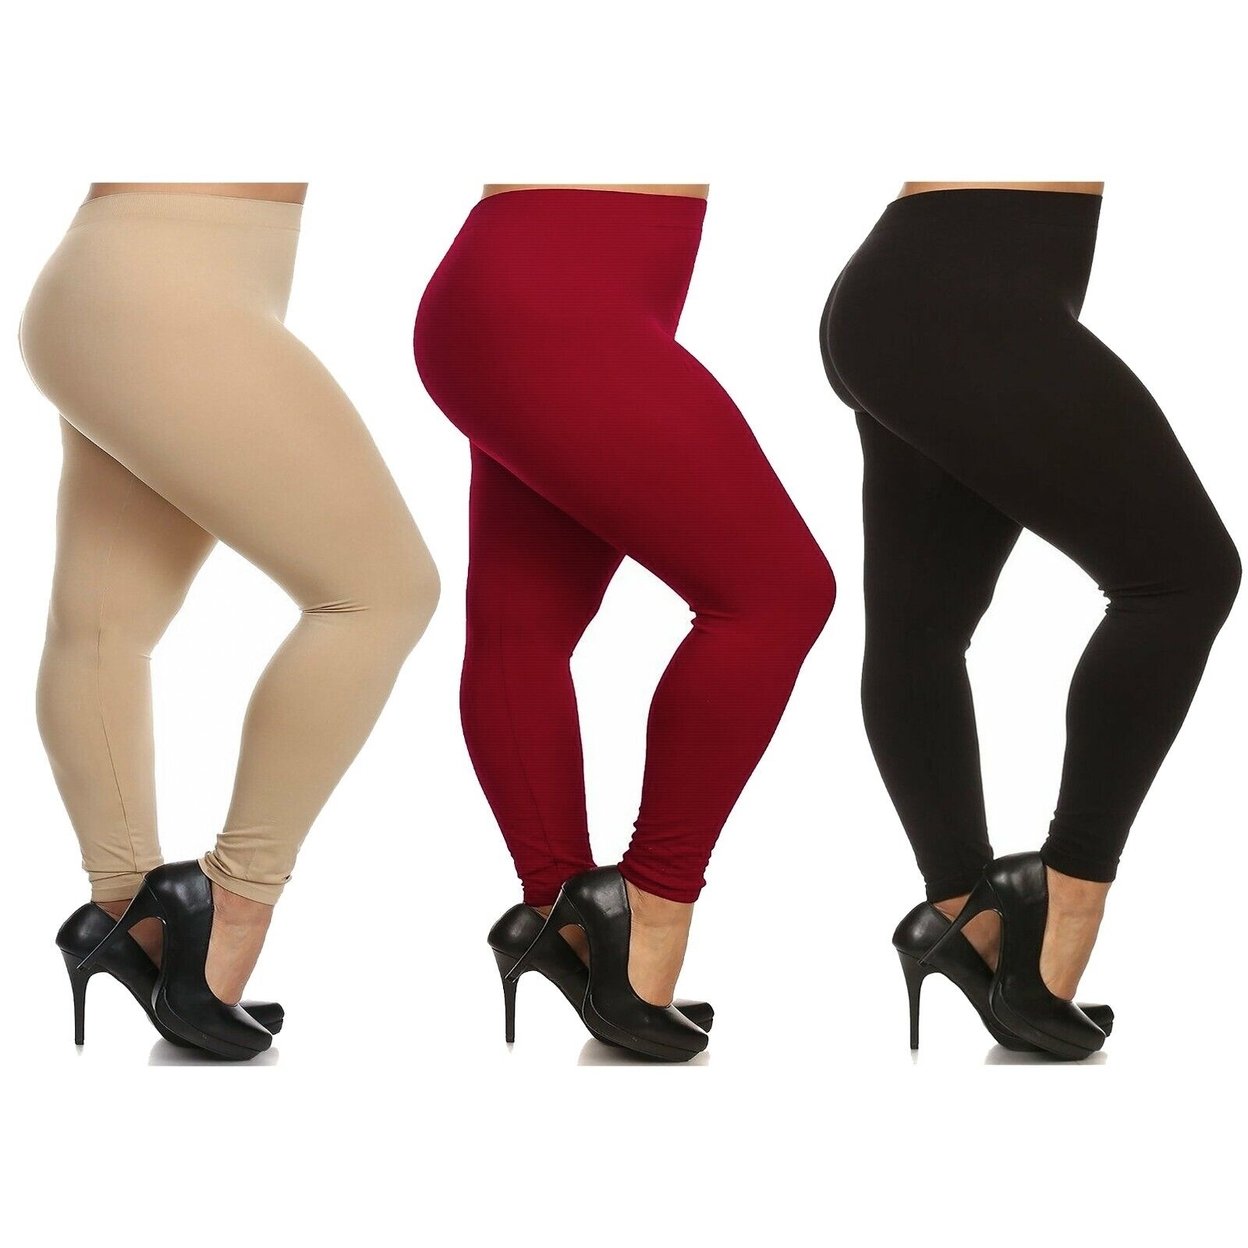 3-Pack: Women's Casual Ultra-Soft Smooth High Waisted Athletic Active Yoga Leggings Plus Size Available - Red,red,red, 1x